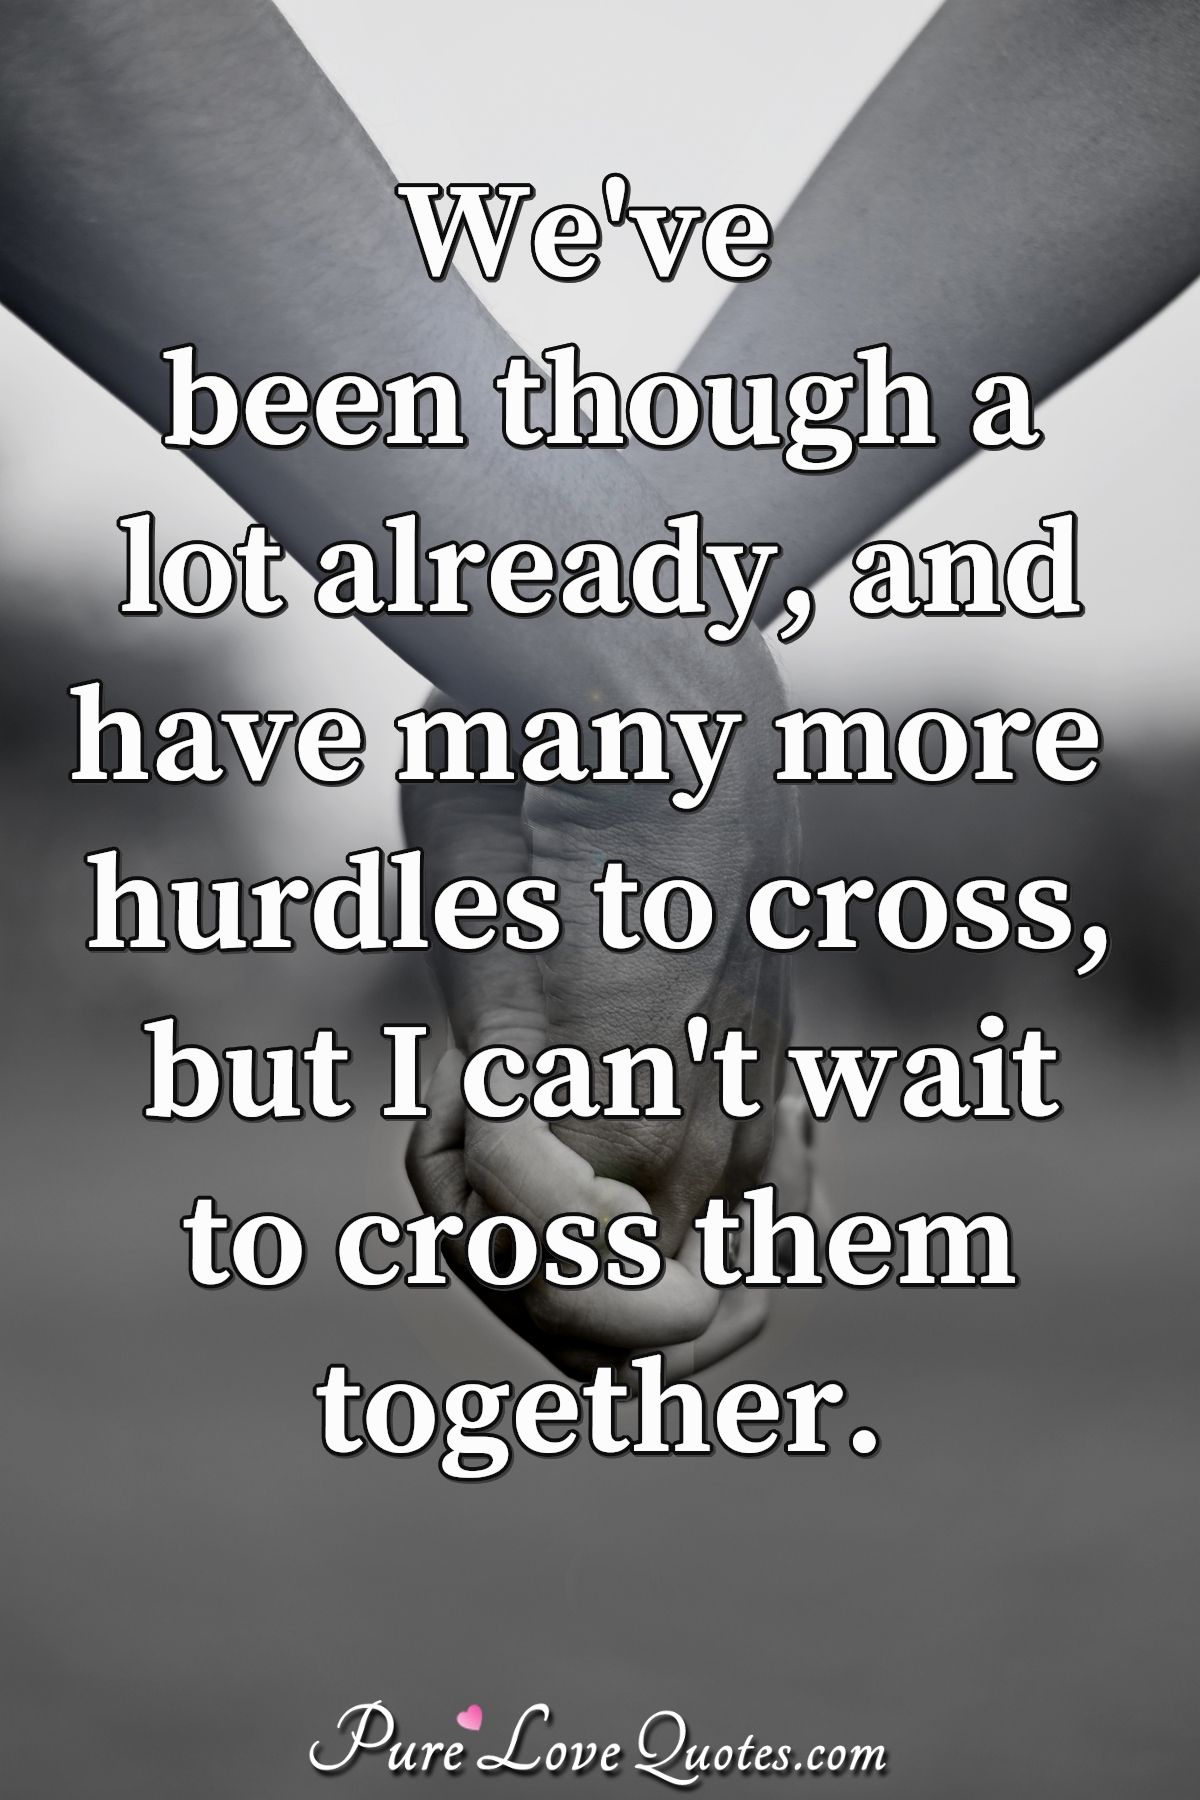 We've been though a lot already, and have many more hurdles to cross, but I can't wait to cross them together. - Anonymous